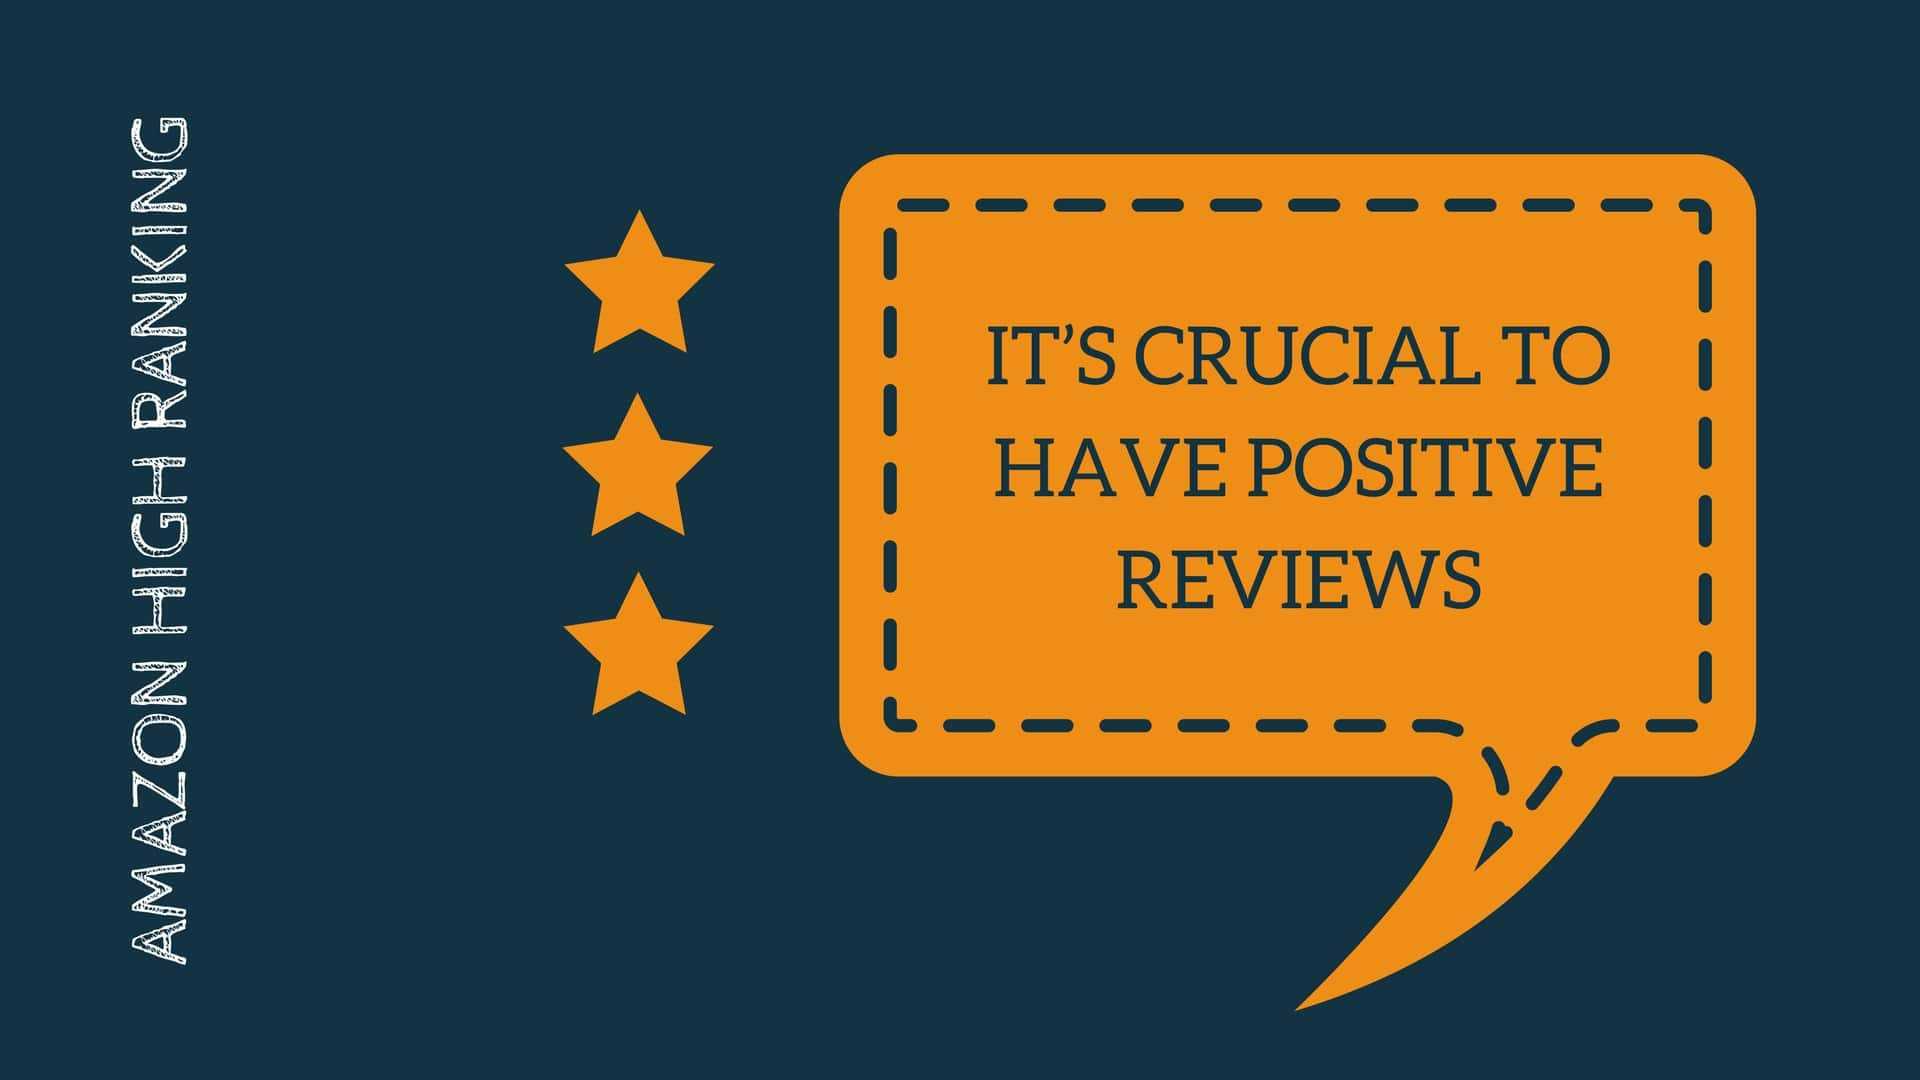 Having positive reviews is crucial for ranking high